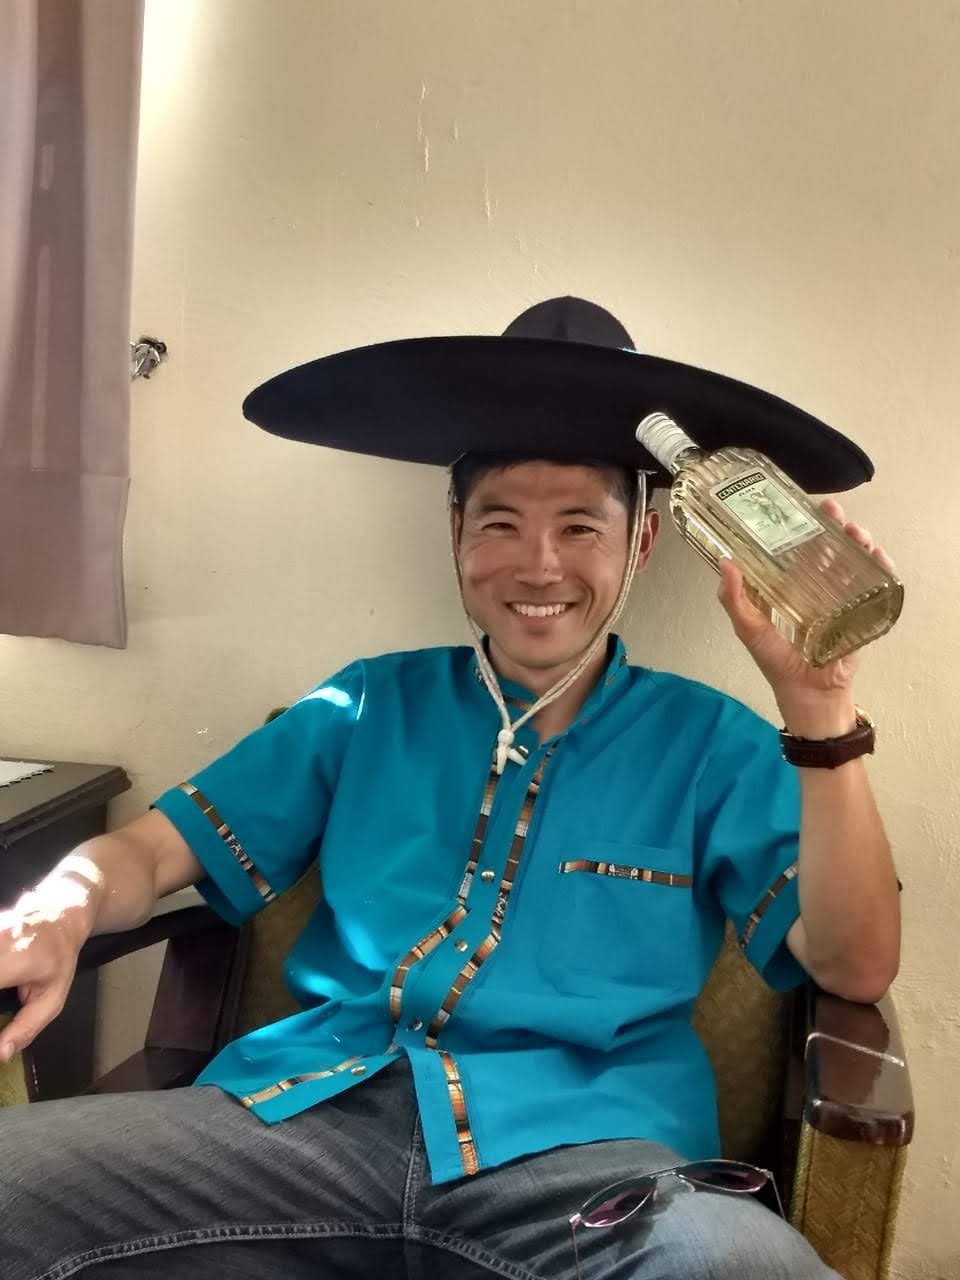 Isao Iwasaki, a Mexican tourist guide, poses with a hat and tequila